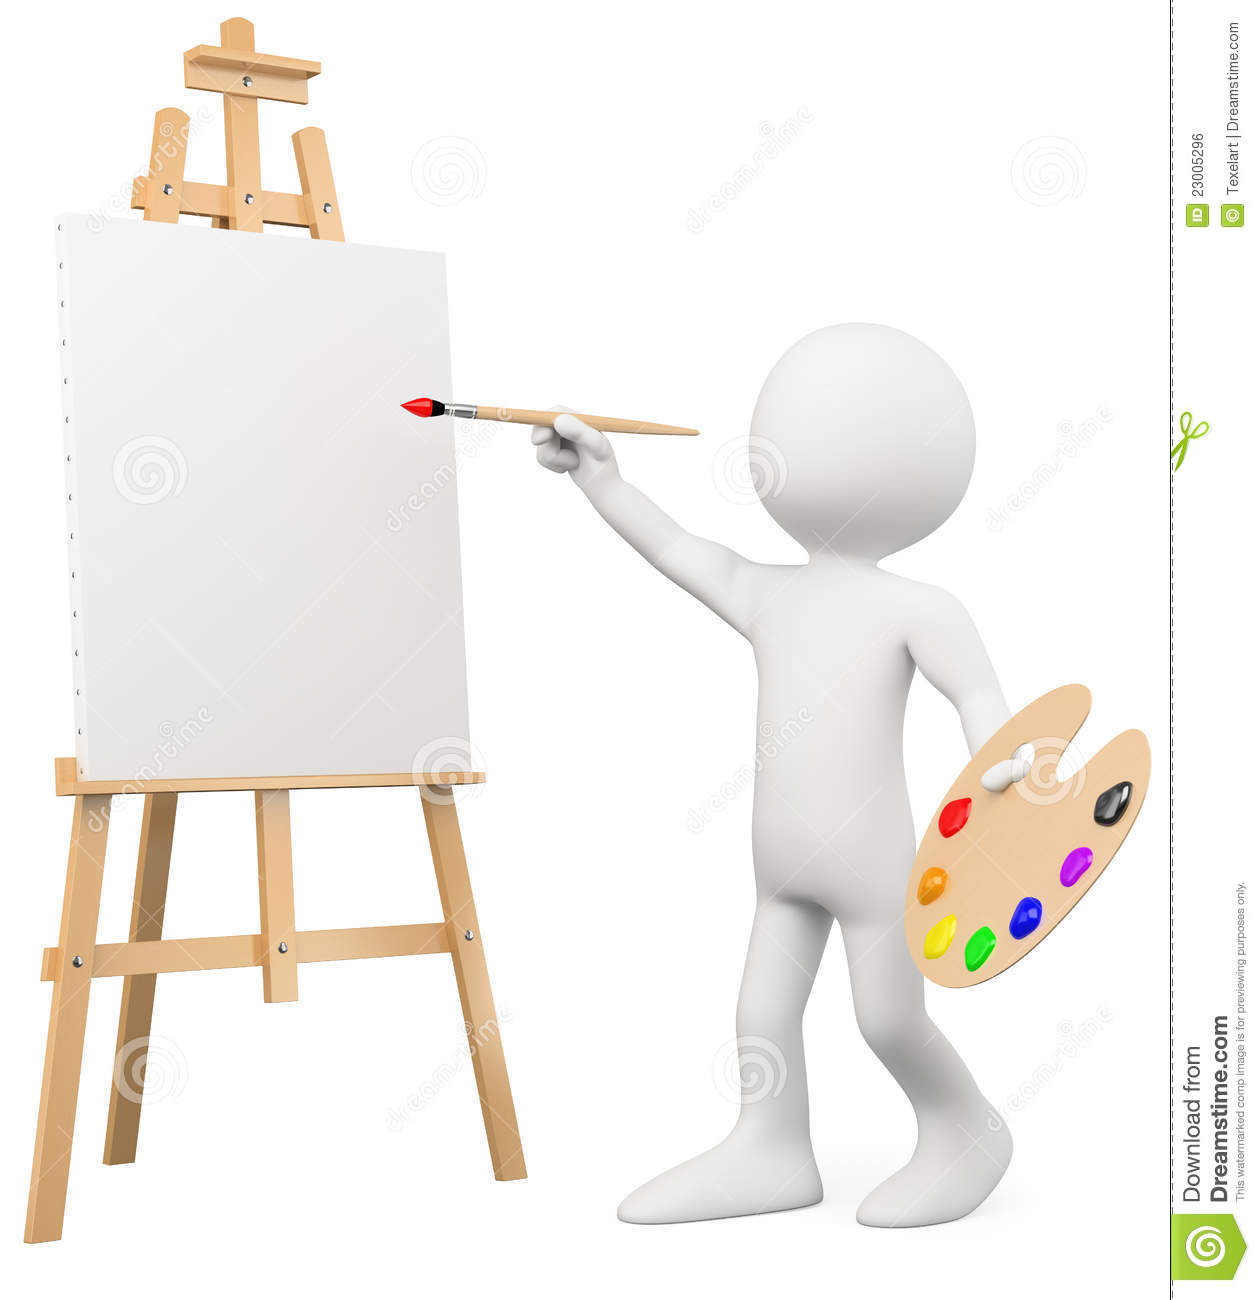 Gallery For Art Easel Clipart Displaying 19 Images For Art Easel